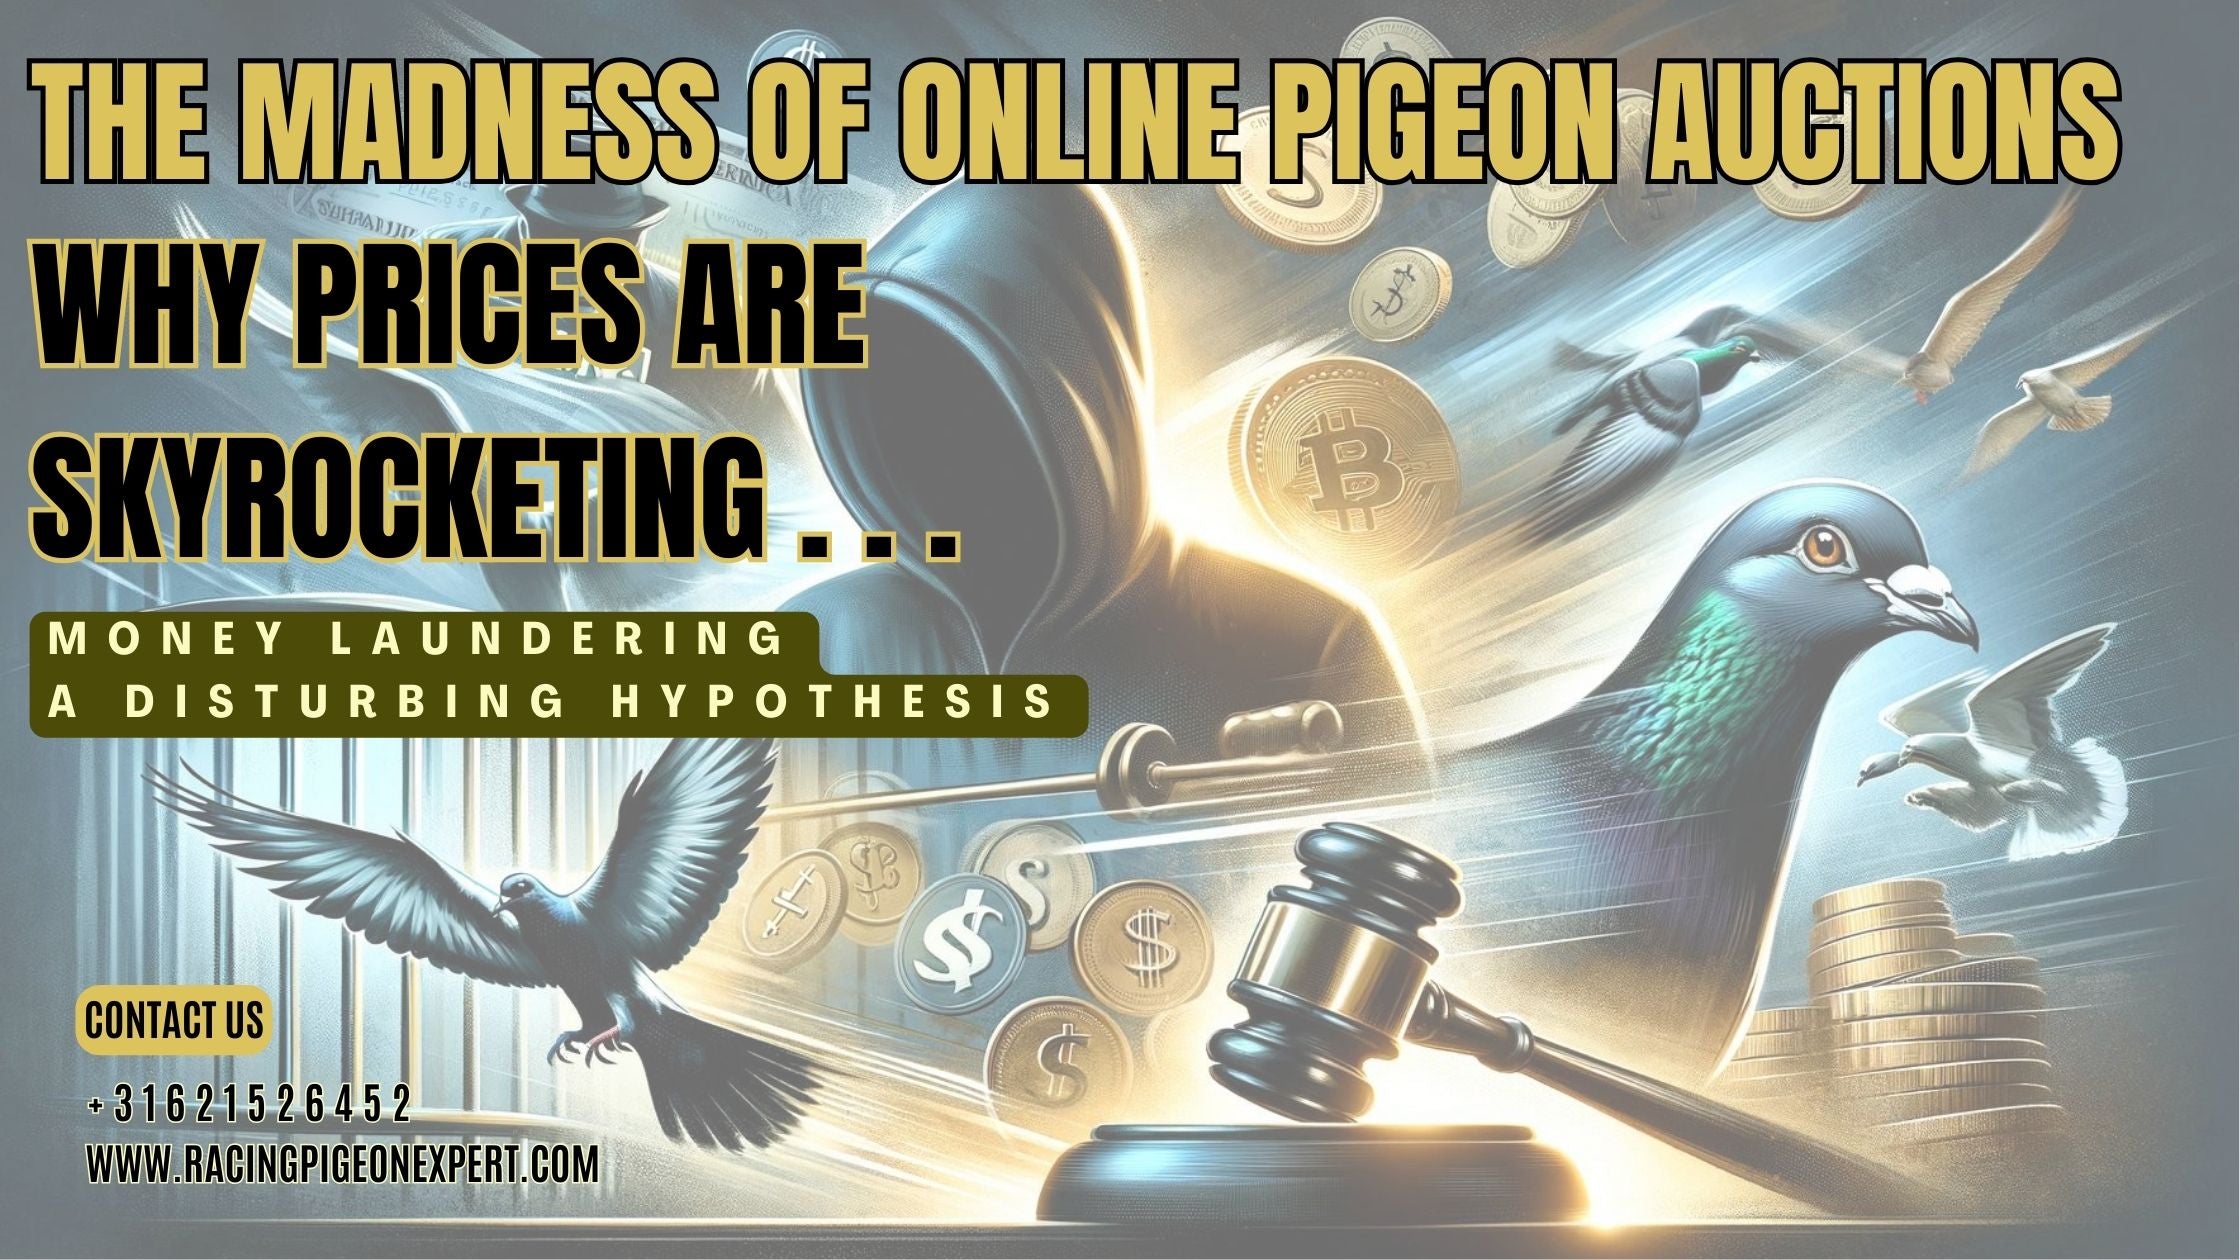 The Madness of Online Pigeon Auctions: Why Prices Are Skyrocketing